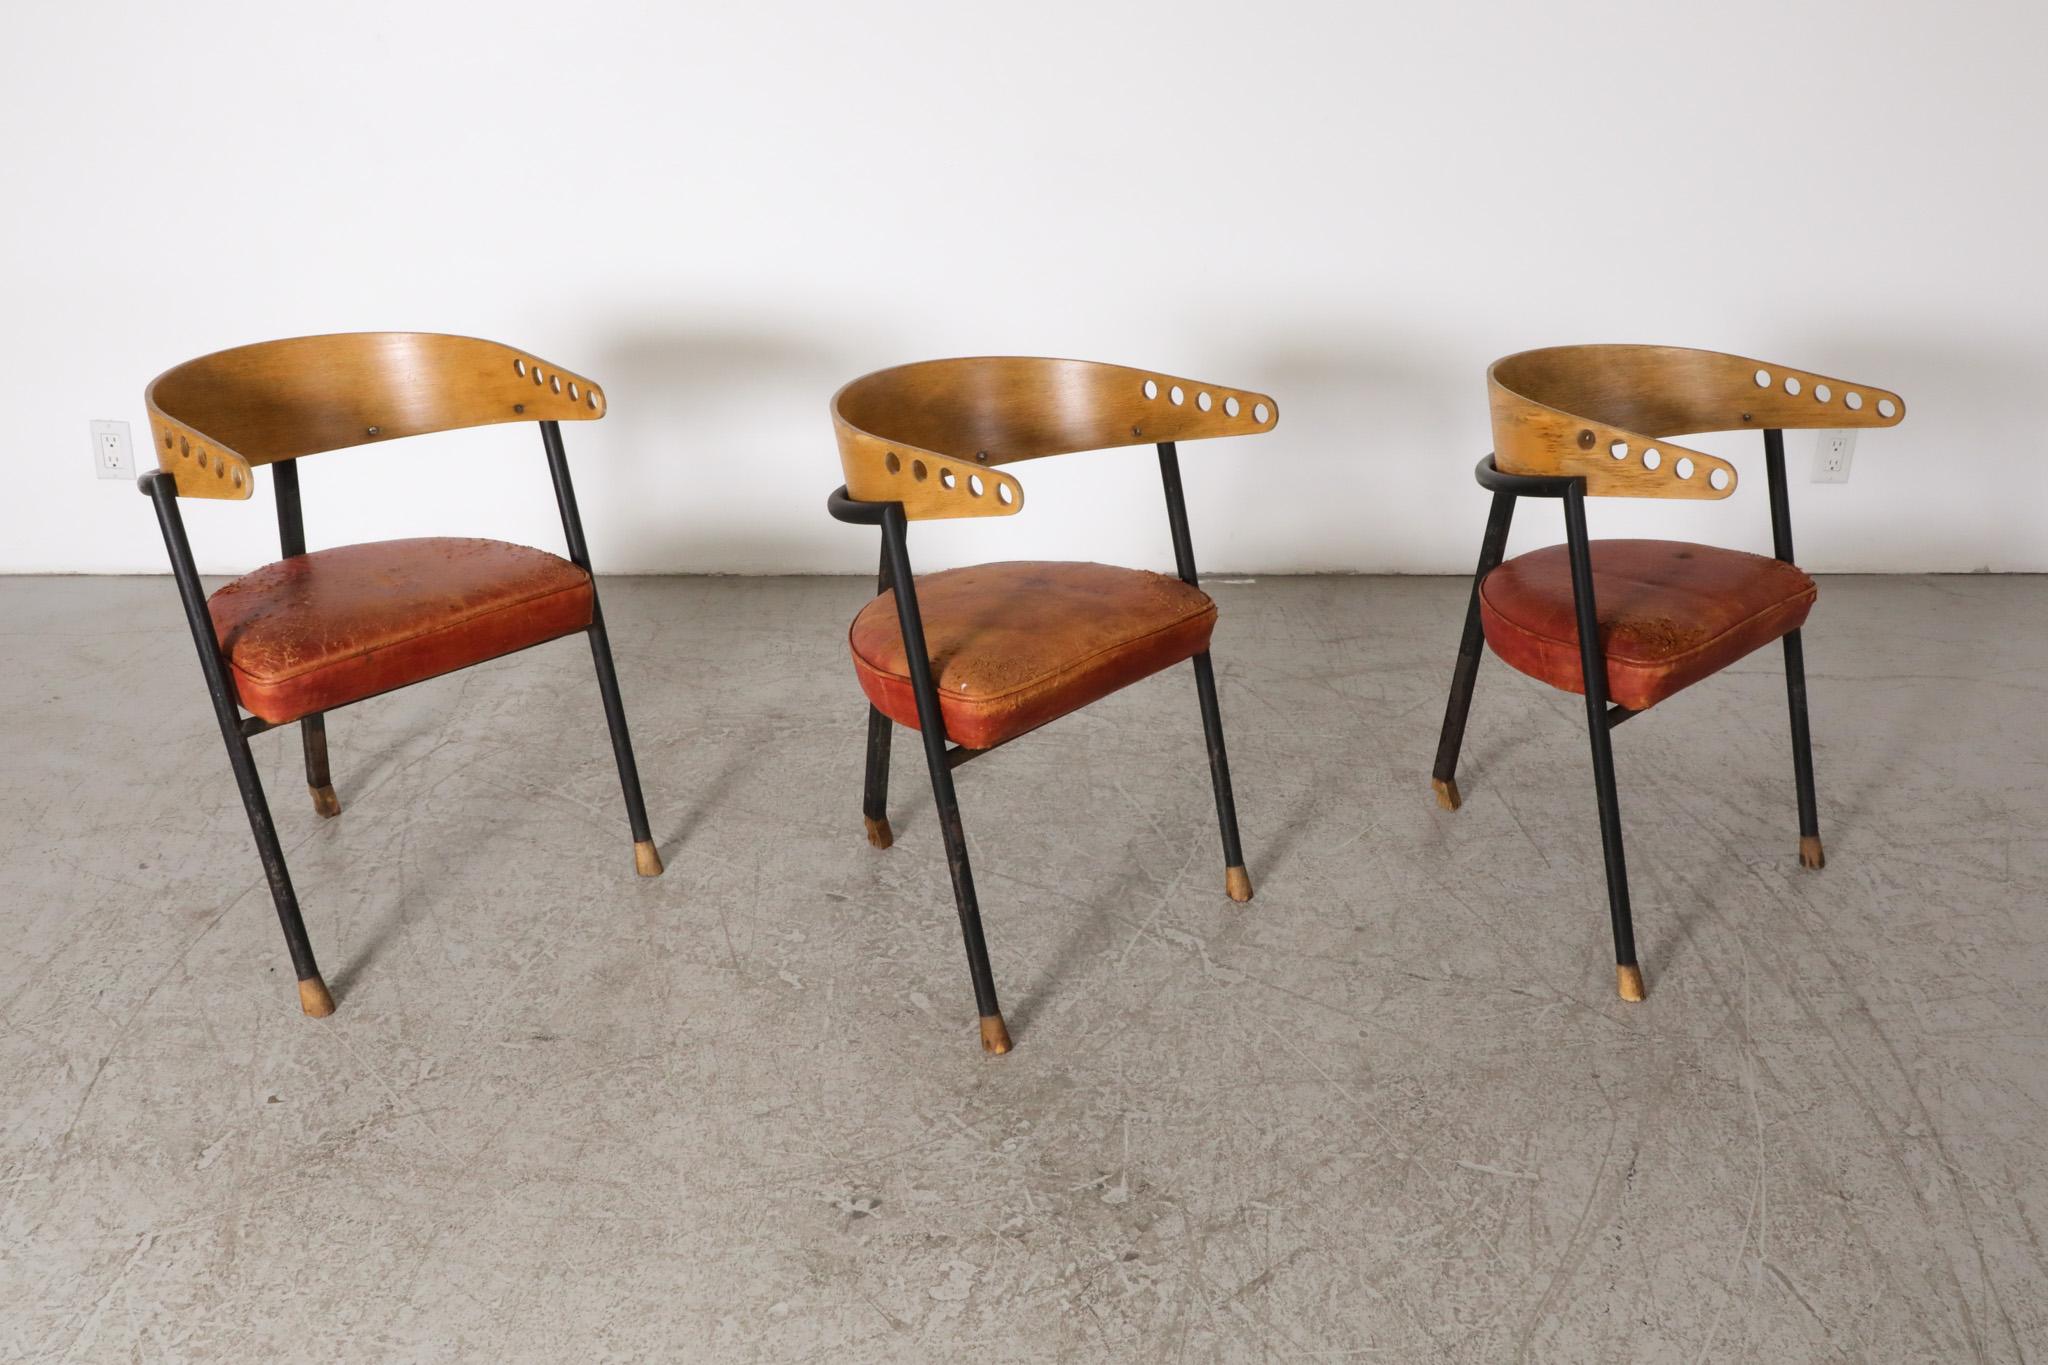 Mid-20th Century Modernist Prouve Style 3-Legged Black Enameled Metal Dining Chairs